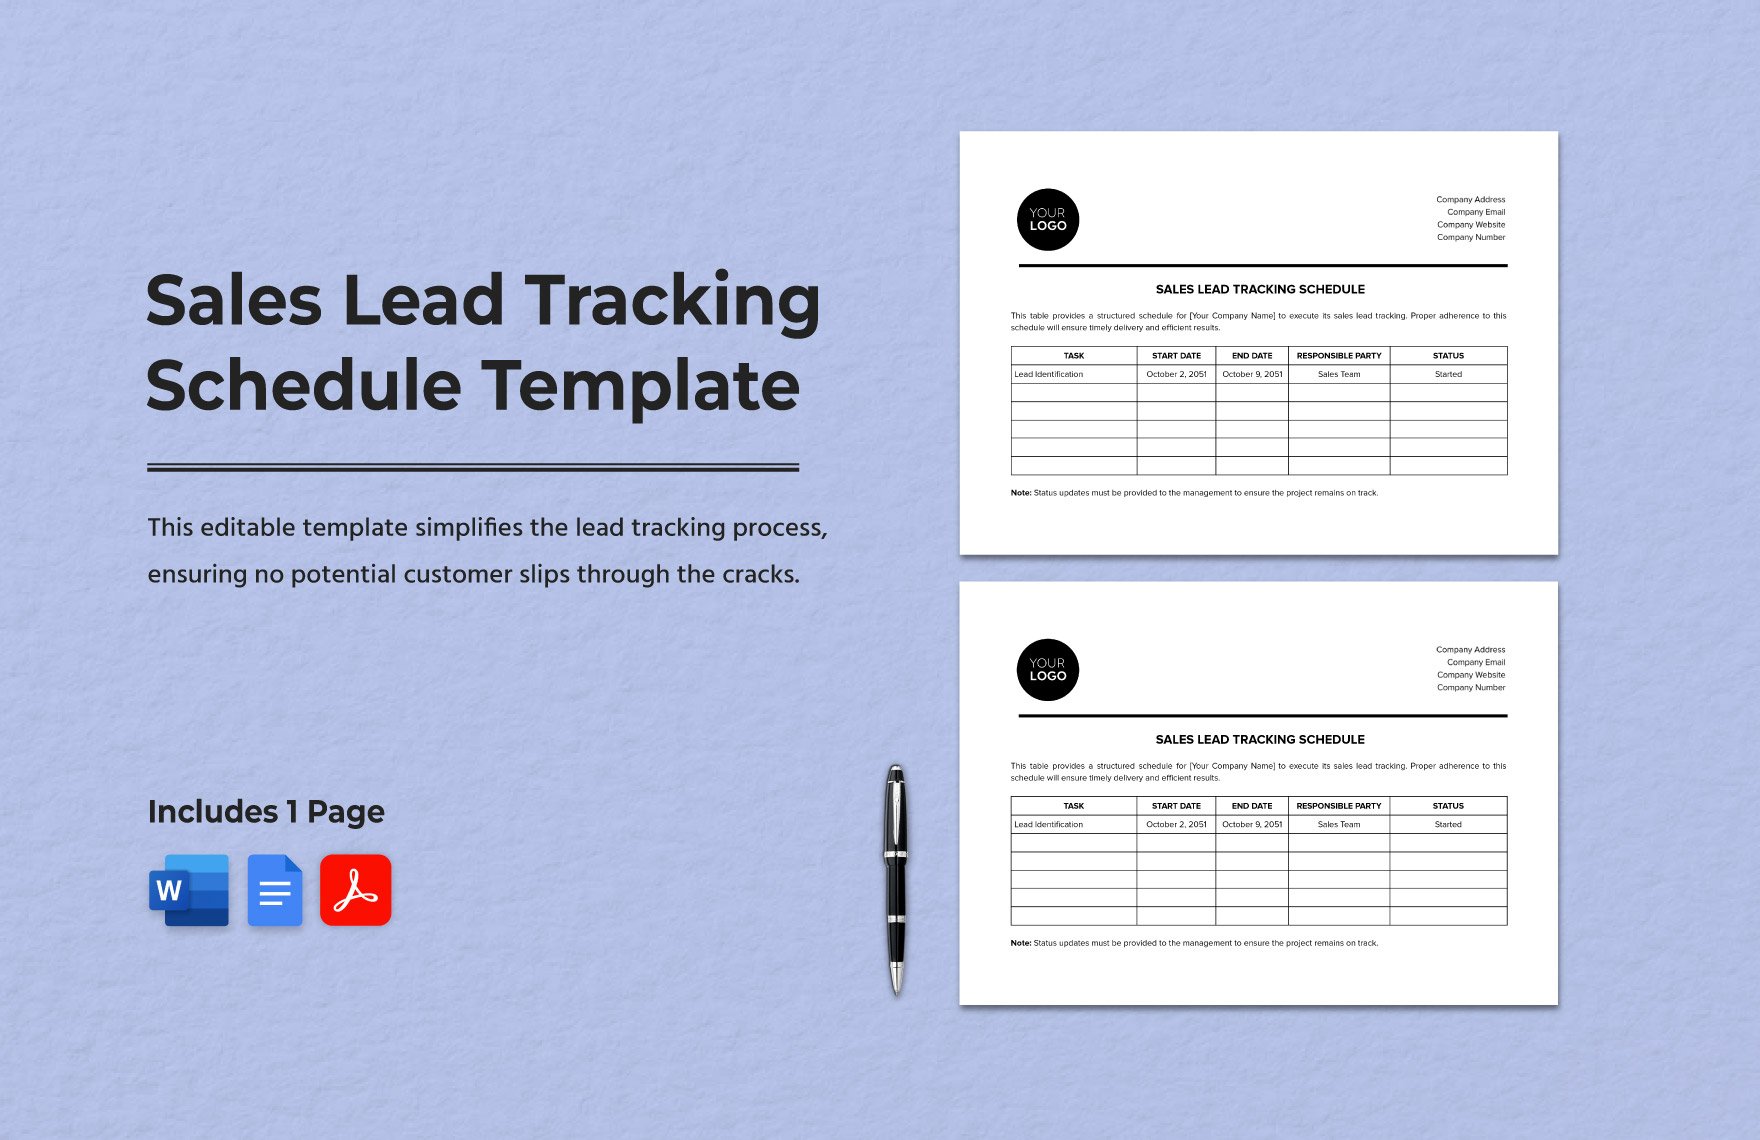 Sales Lead Tracking Schedule Template in Word, Google Docs, PDF